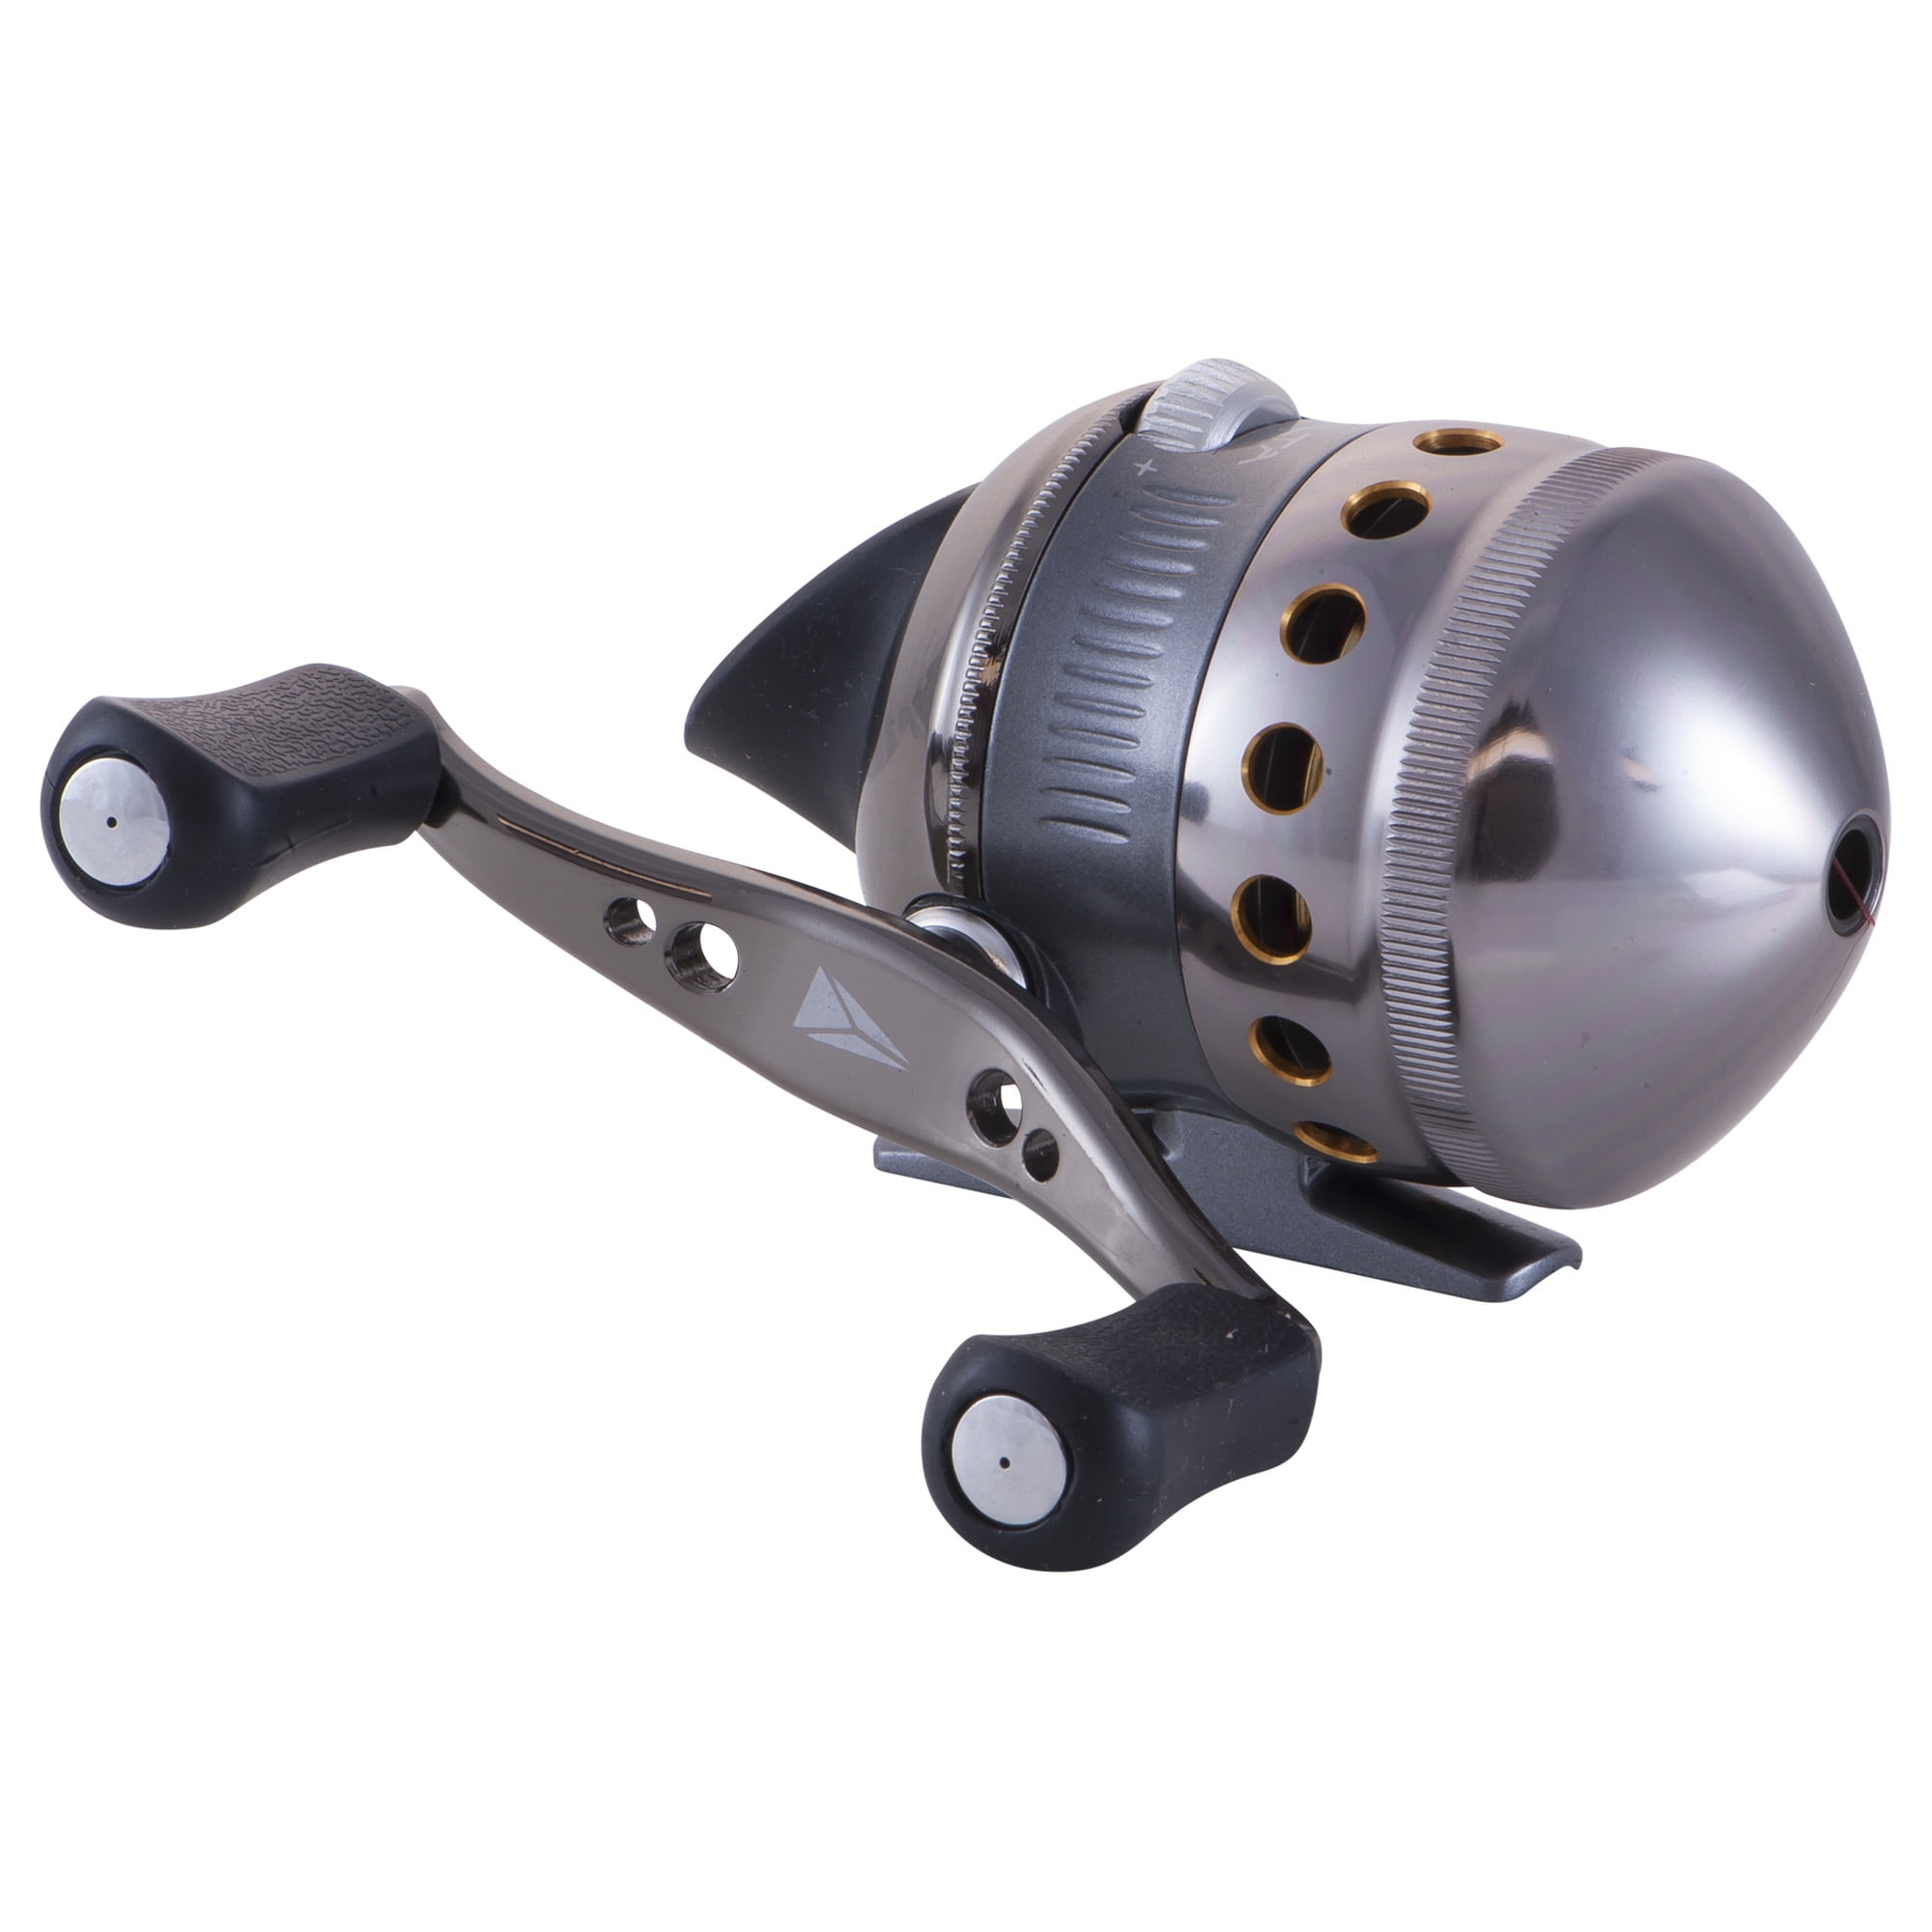 Zebco Delta Spincast Fishing Reel, Size 30 Reel, Changeable Right- or  Left-Hand Retrieve, Pre-Spooled with 10-Pound Zebco Fishing Line, Aluminum  and